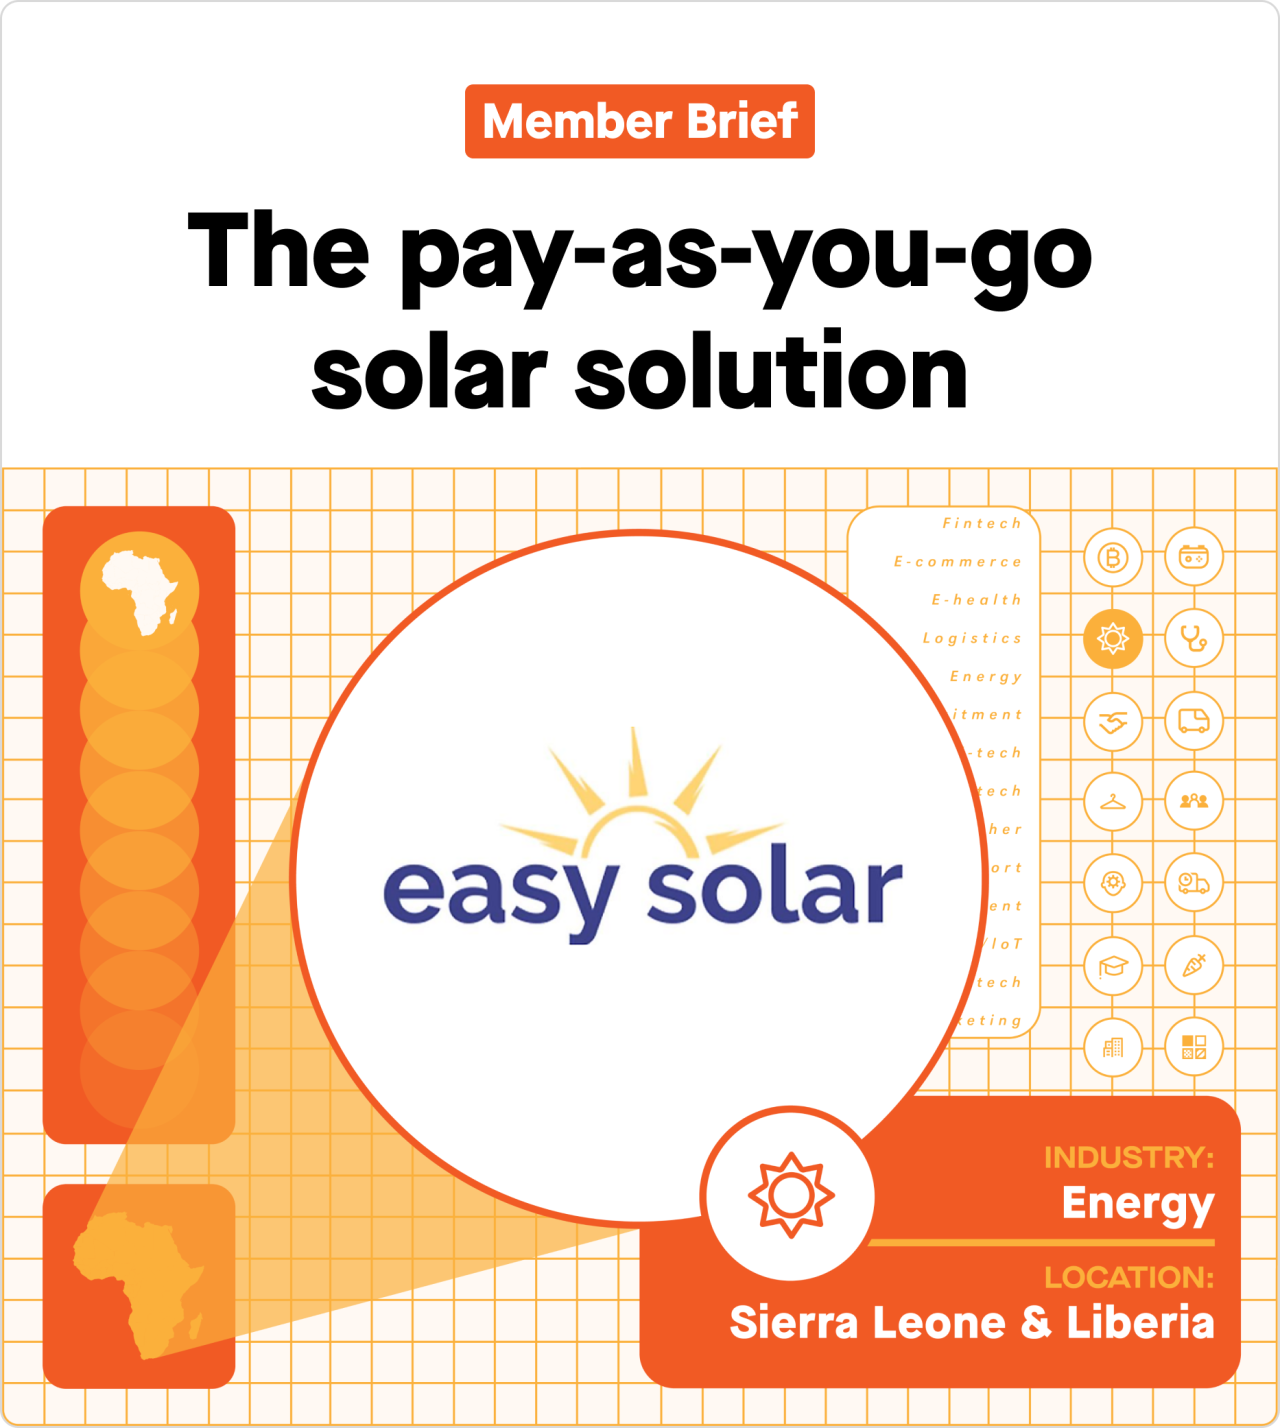 Easy Solar is making energy affordable and accessible in west Africa